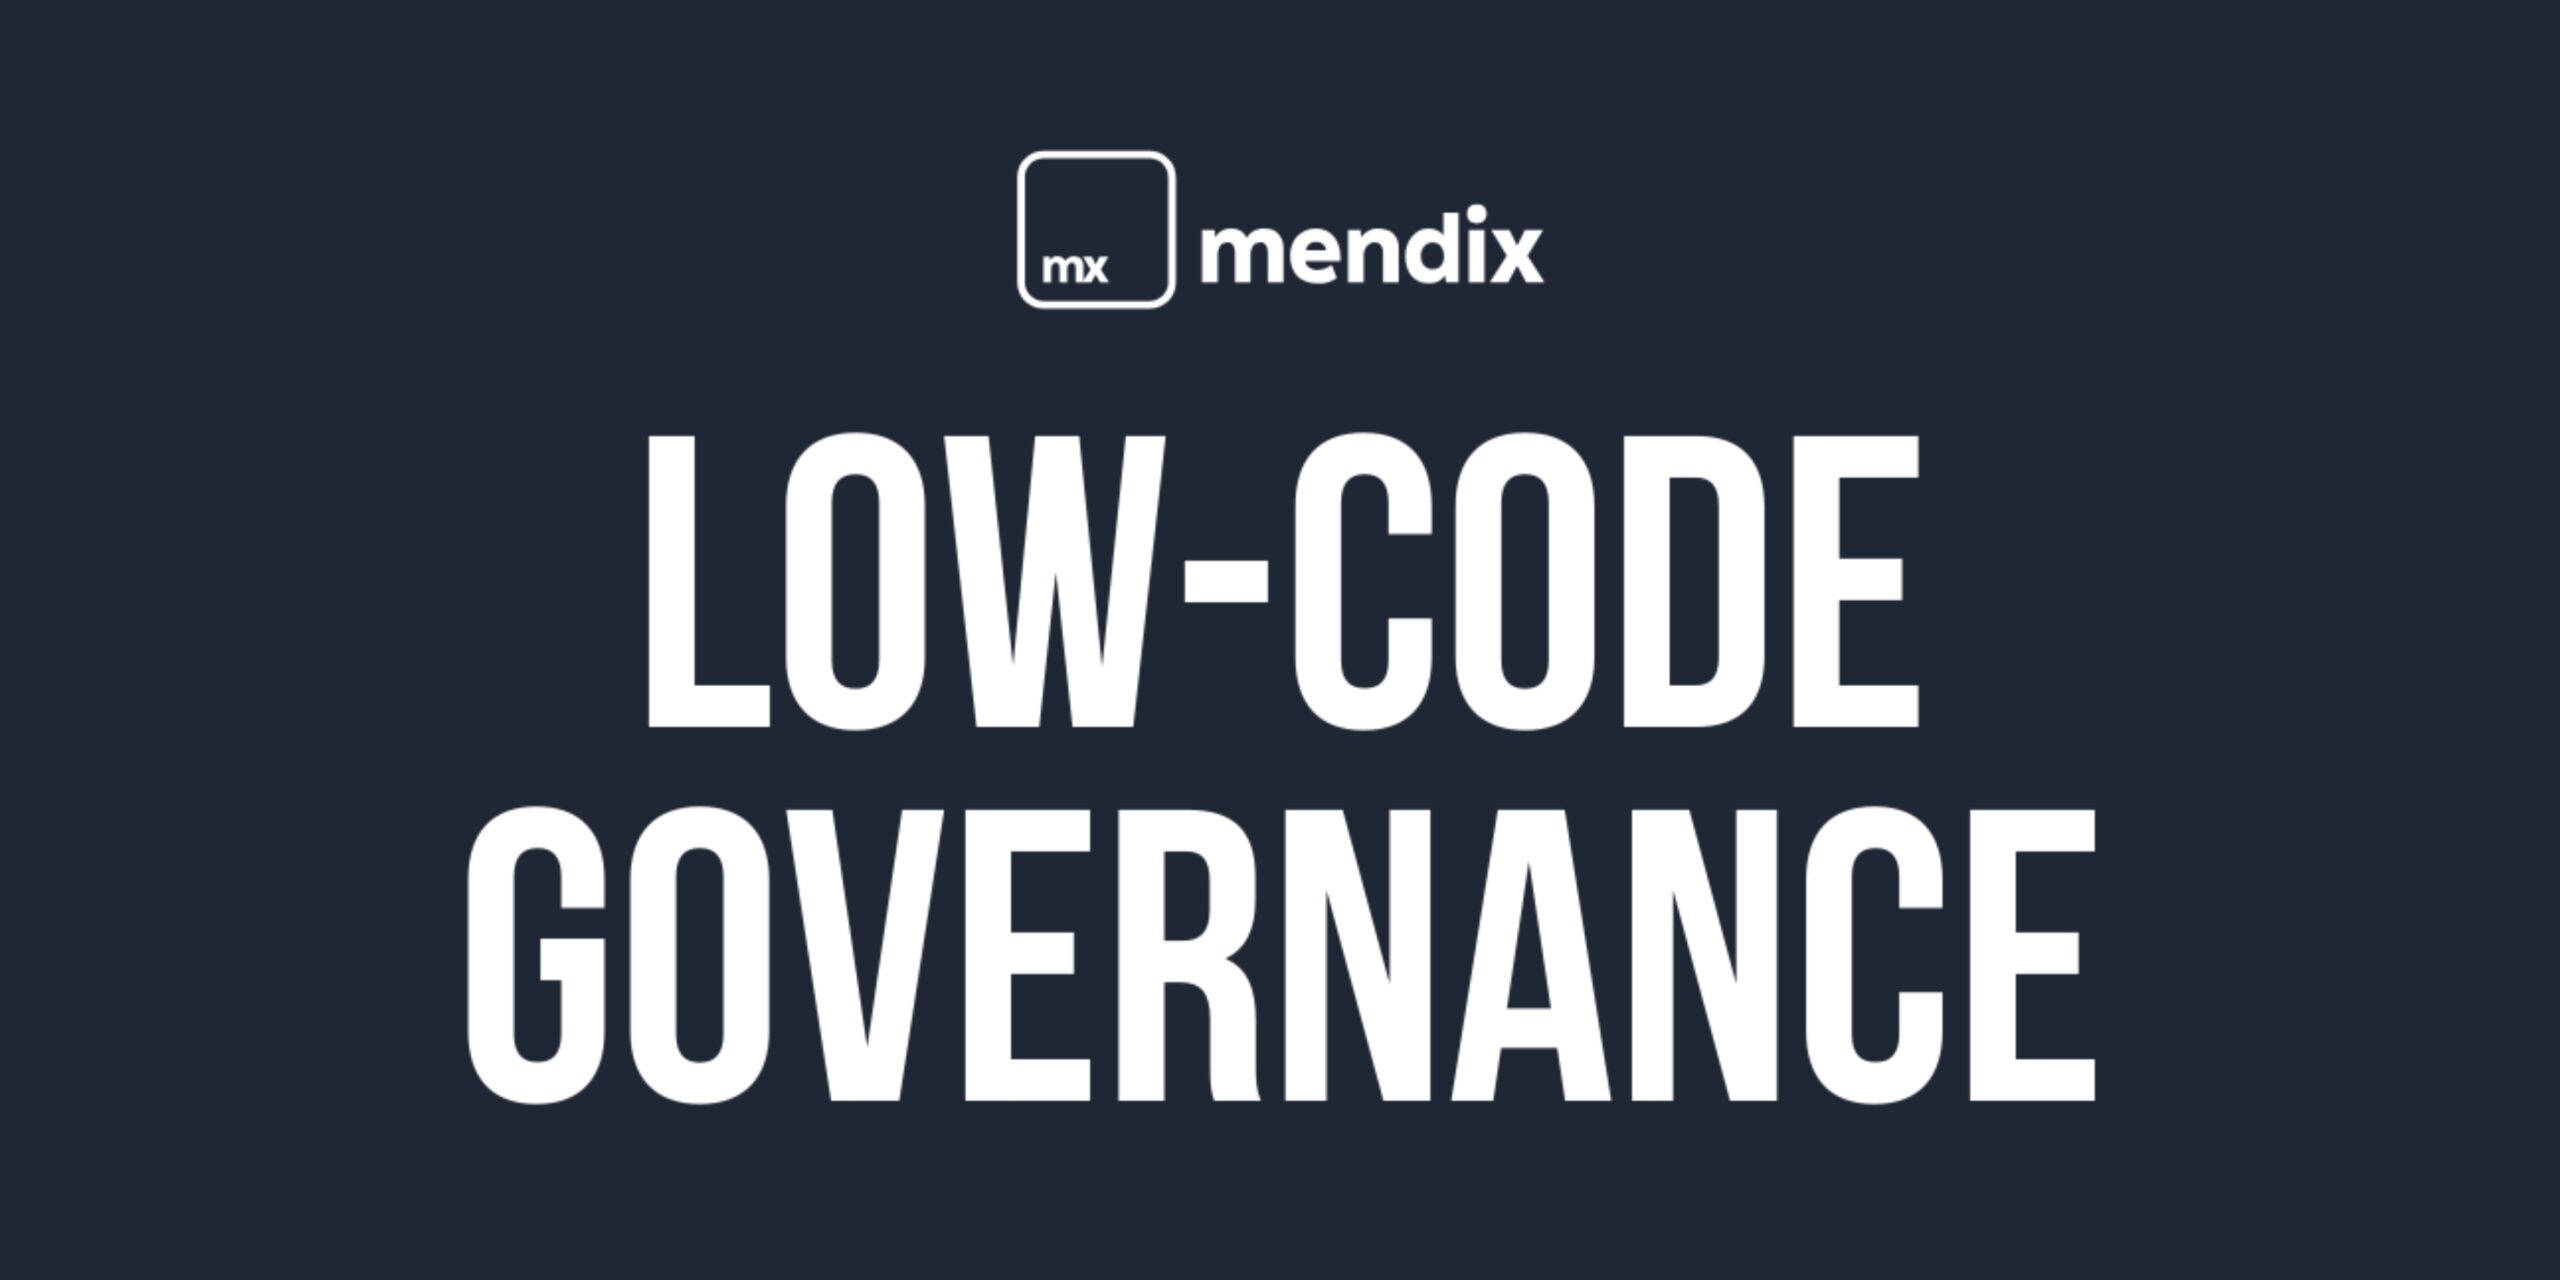 low-code-governance-from-mendix